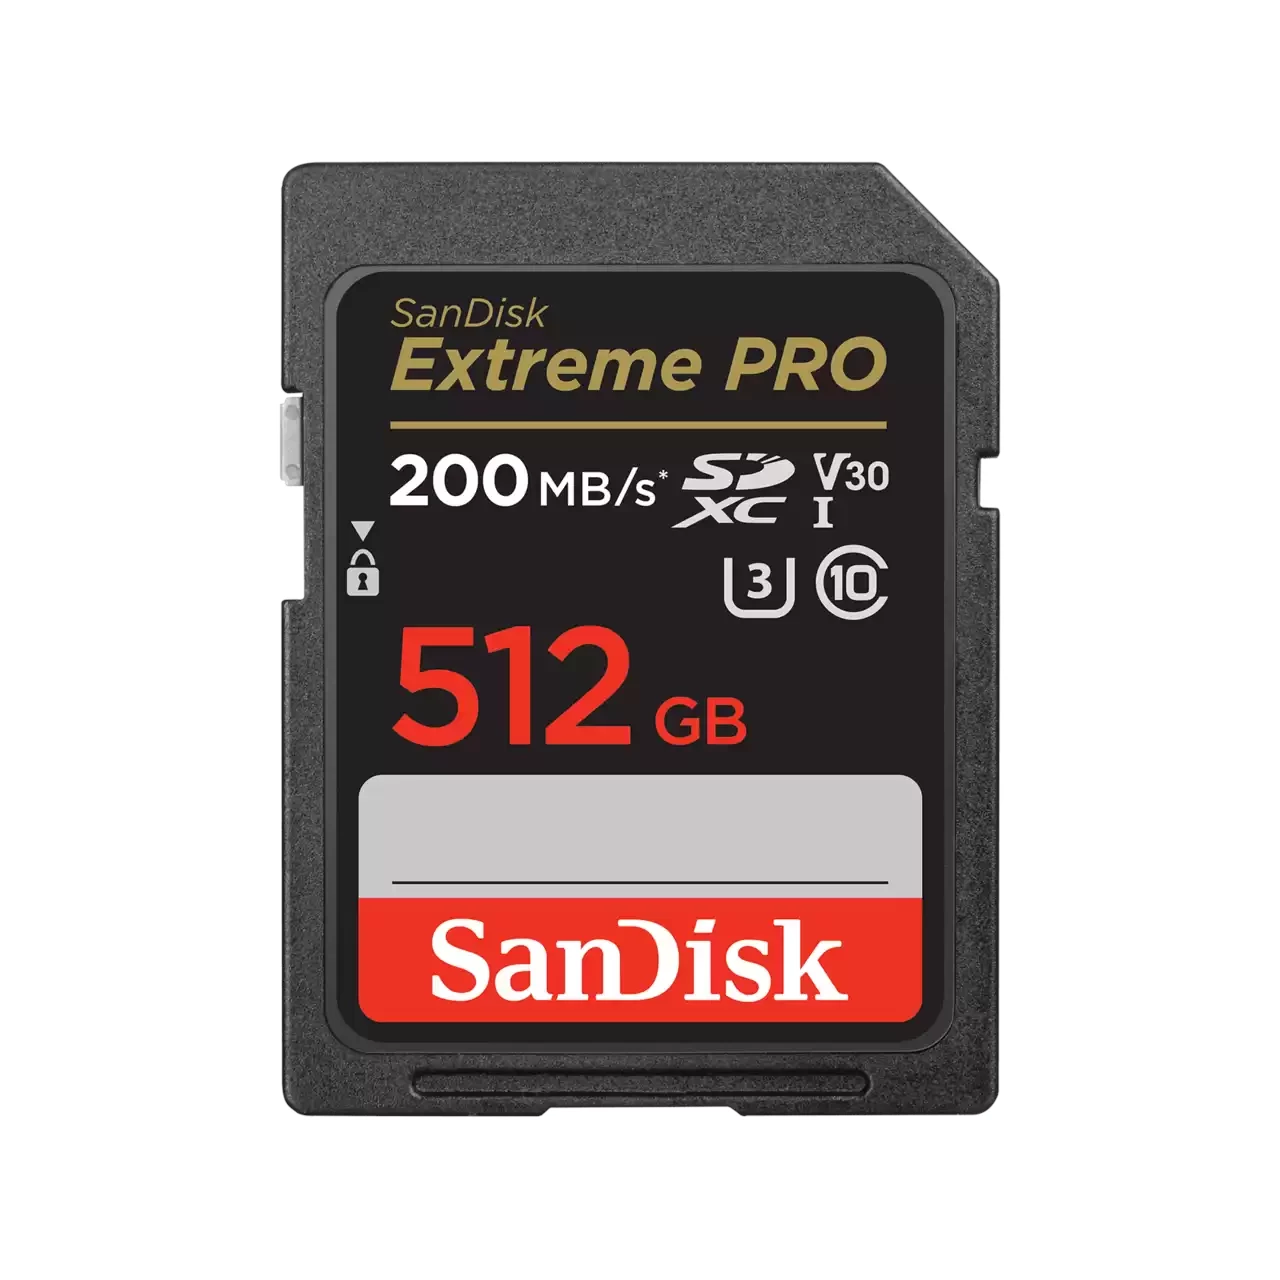 Sandisk Extreme PRO 512Gb SDXC UHS-I Card #sDsDXXD-512g-gN4iN